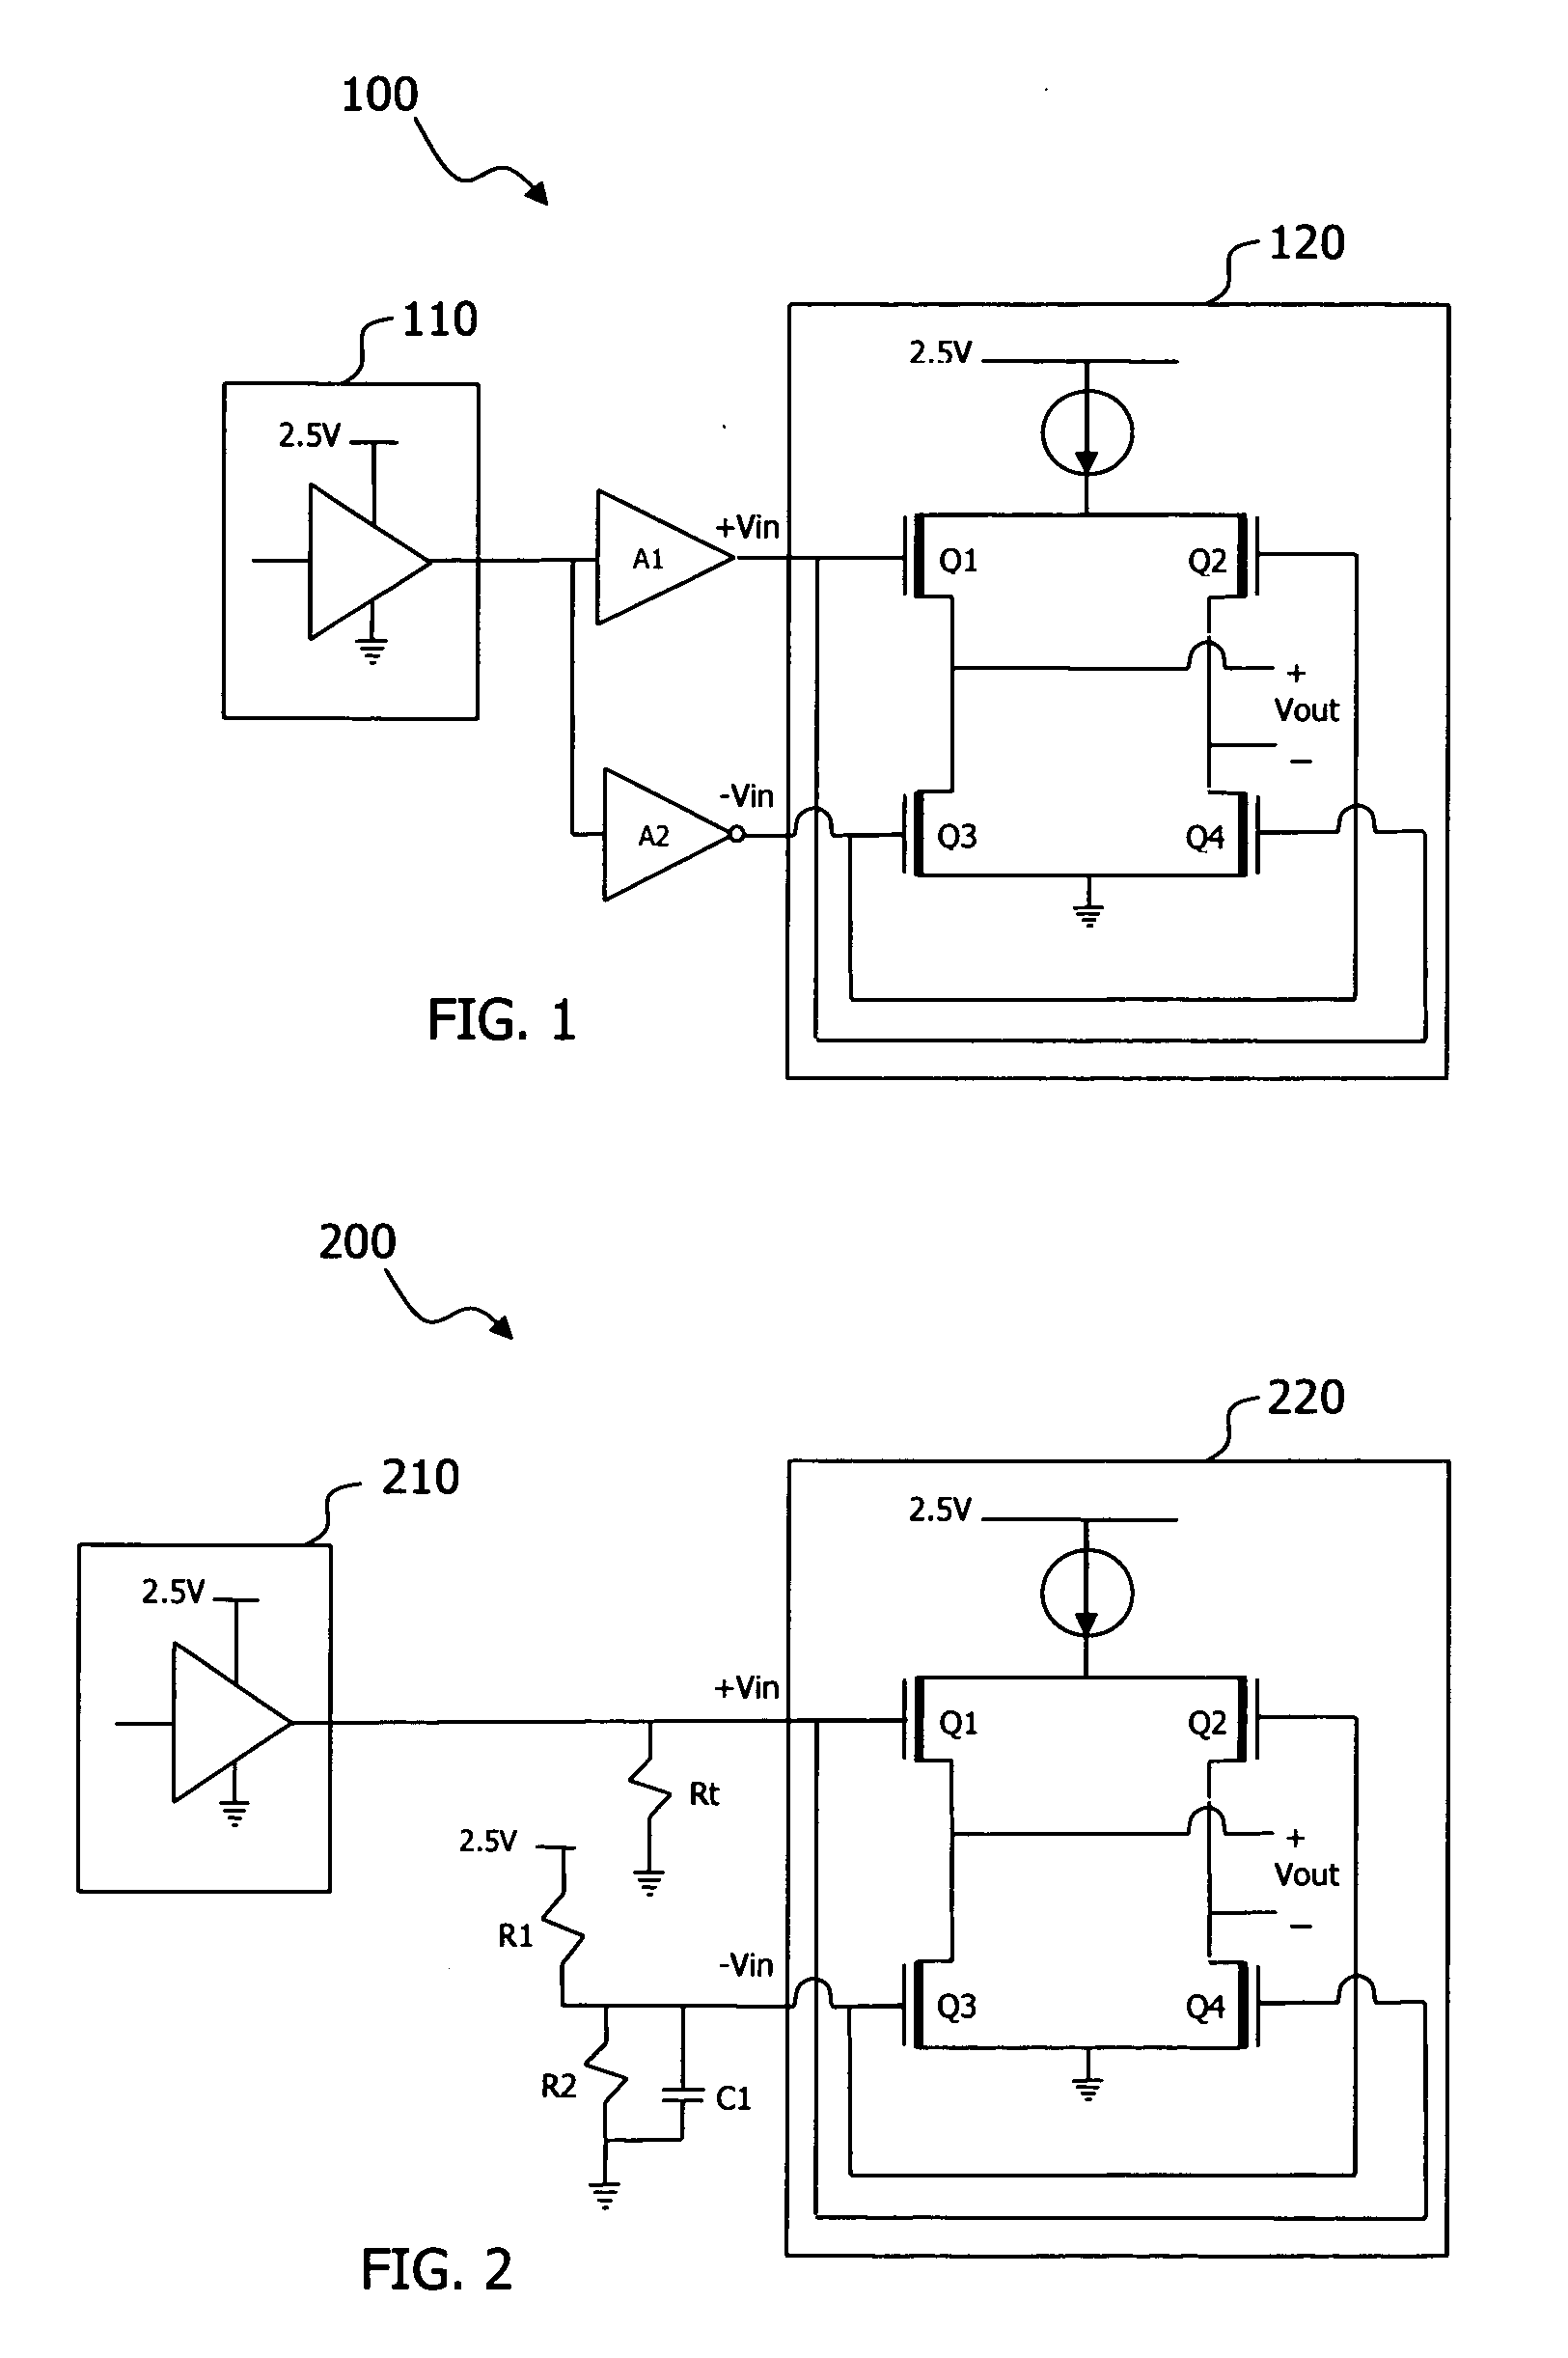 Single-ended CMOS signal interface to differential signal receiver loads